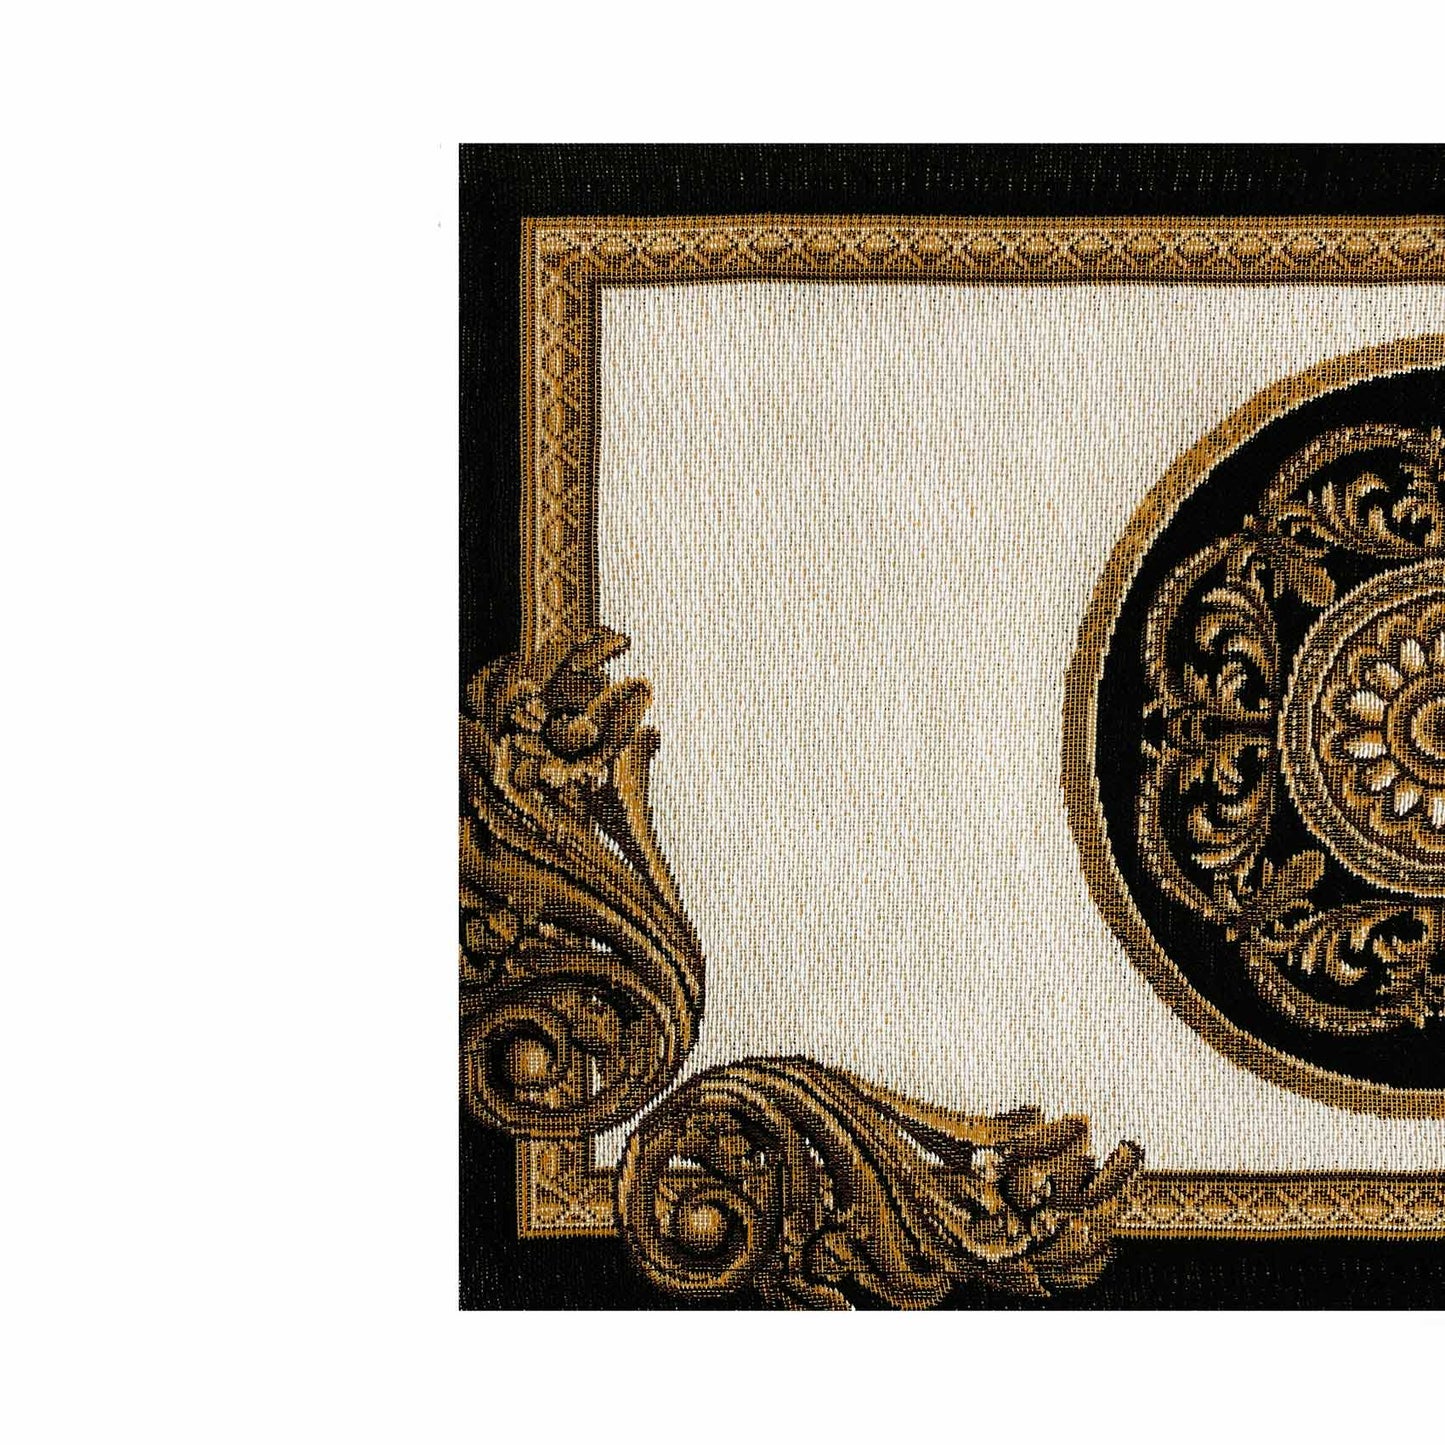 Baroque Style Tapestry Placemat With Medallion Pattern. White Cotton Golden Circle Napkin, Luxury Kitchen, Living Room Home Decor.